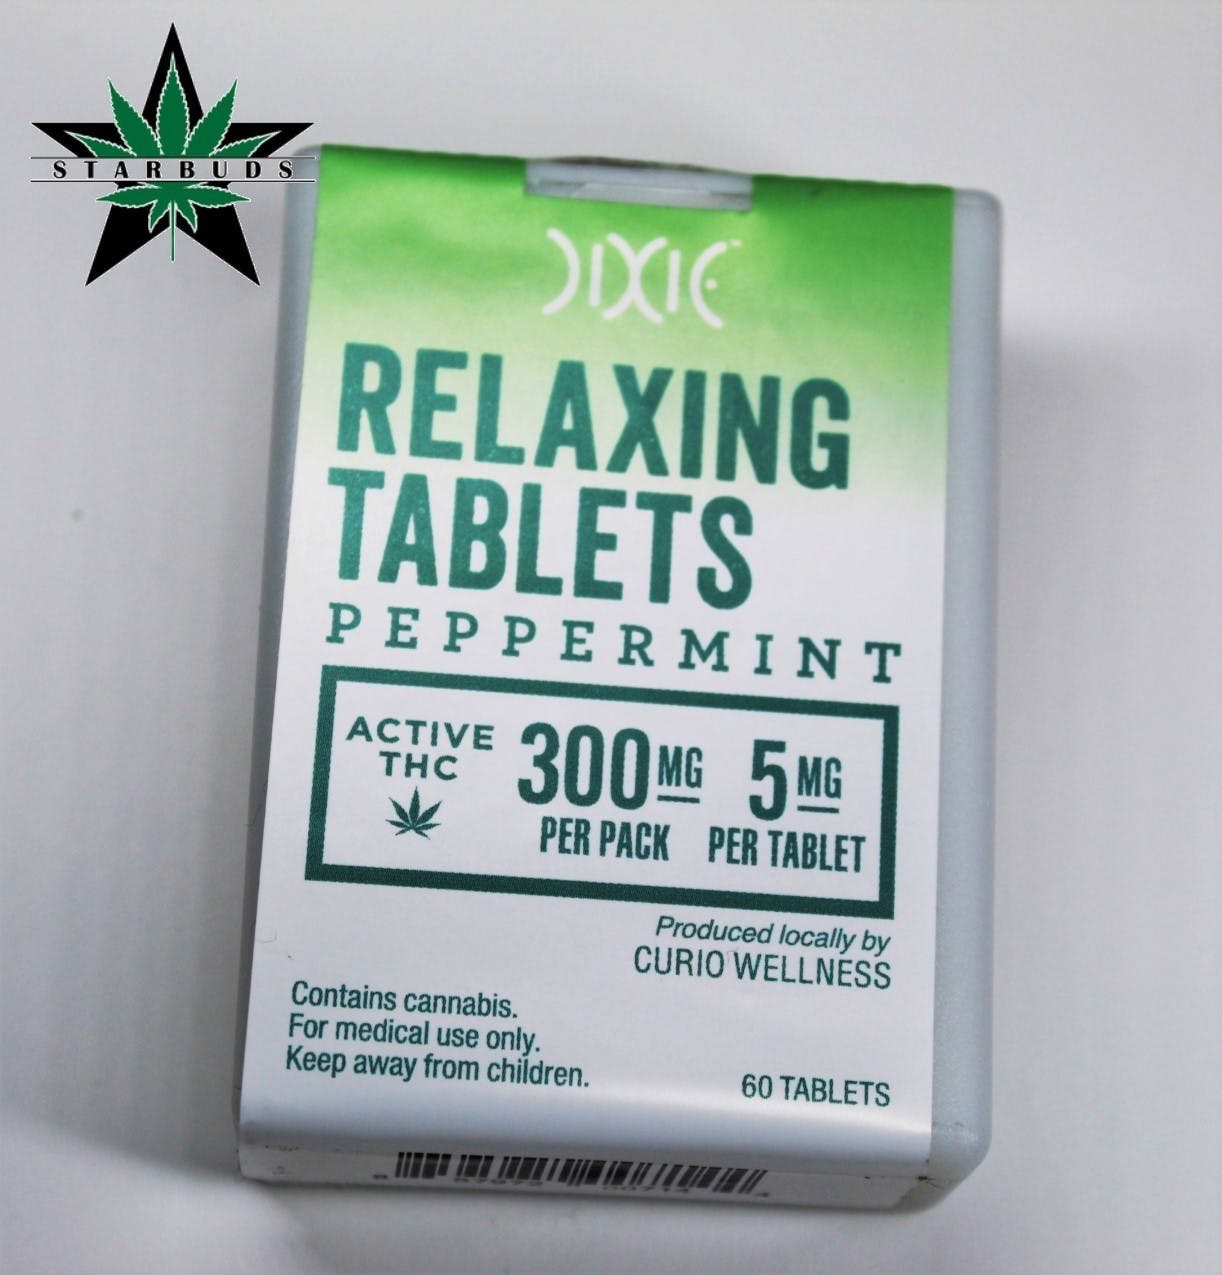 edible-relaxing-tablets-peppermint-300mg